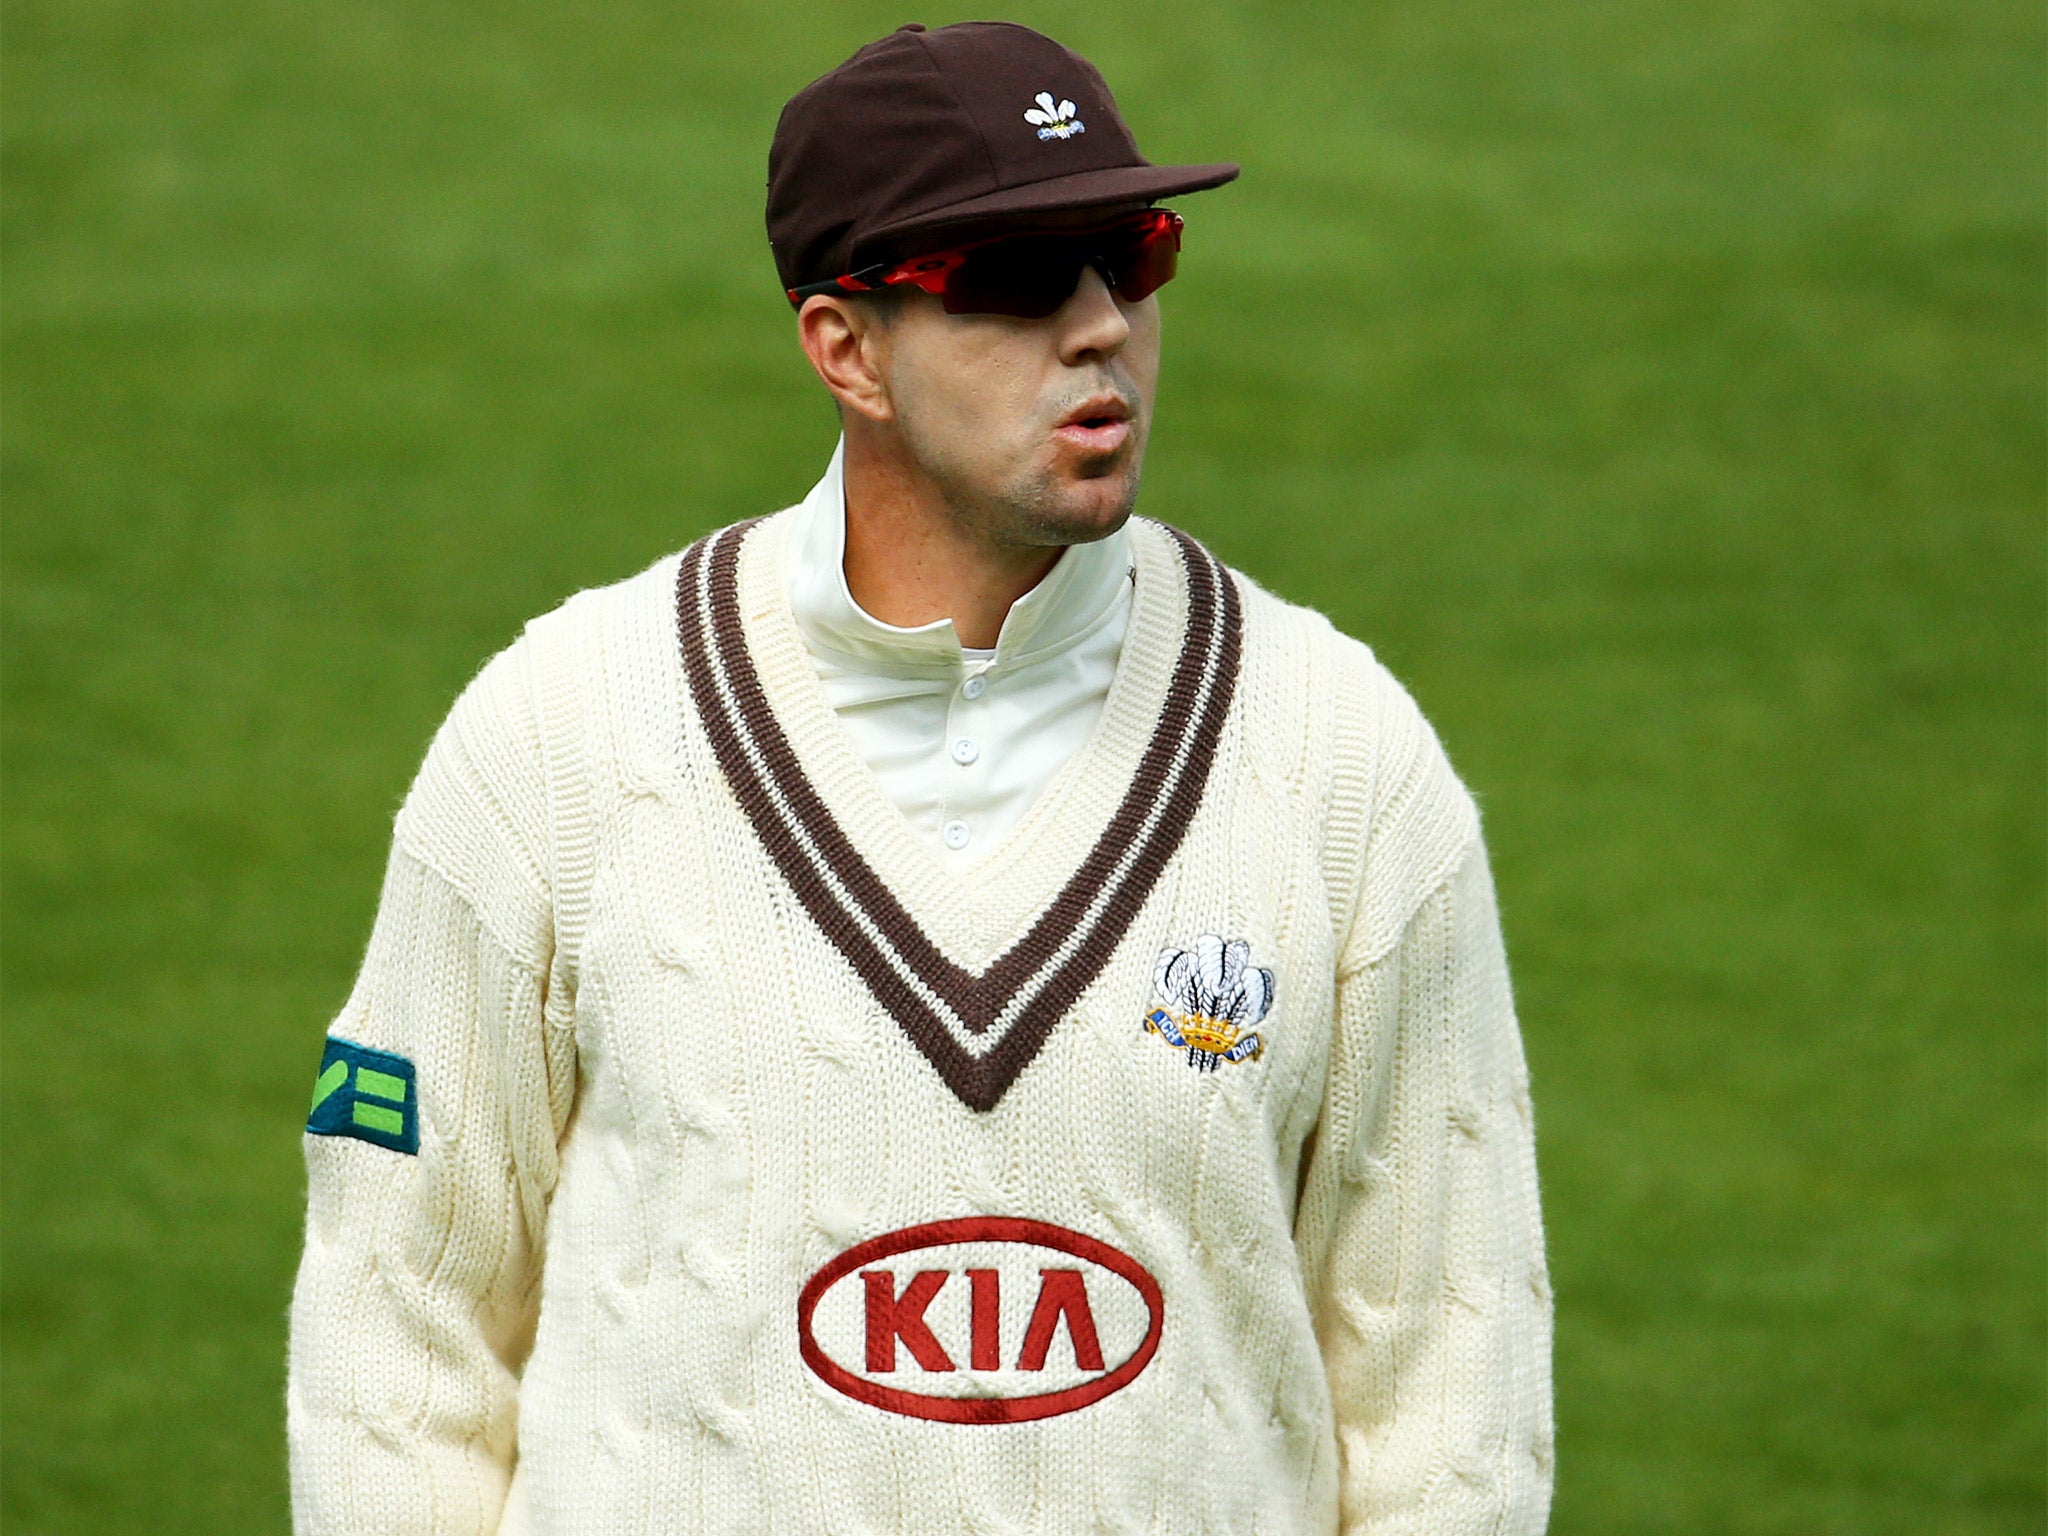 Sacked batsman Kevin Pietersen says that the new director of cricket has some ‘huge decisions’ to make